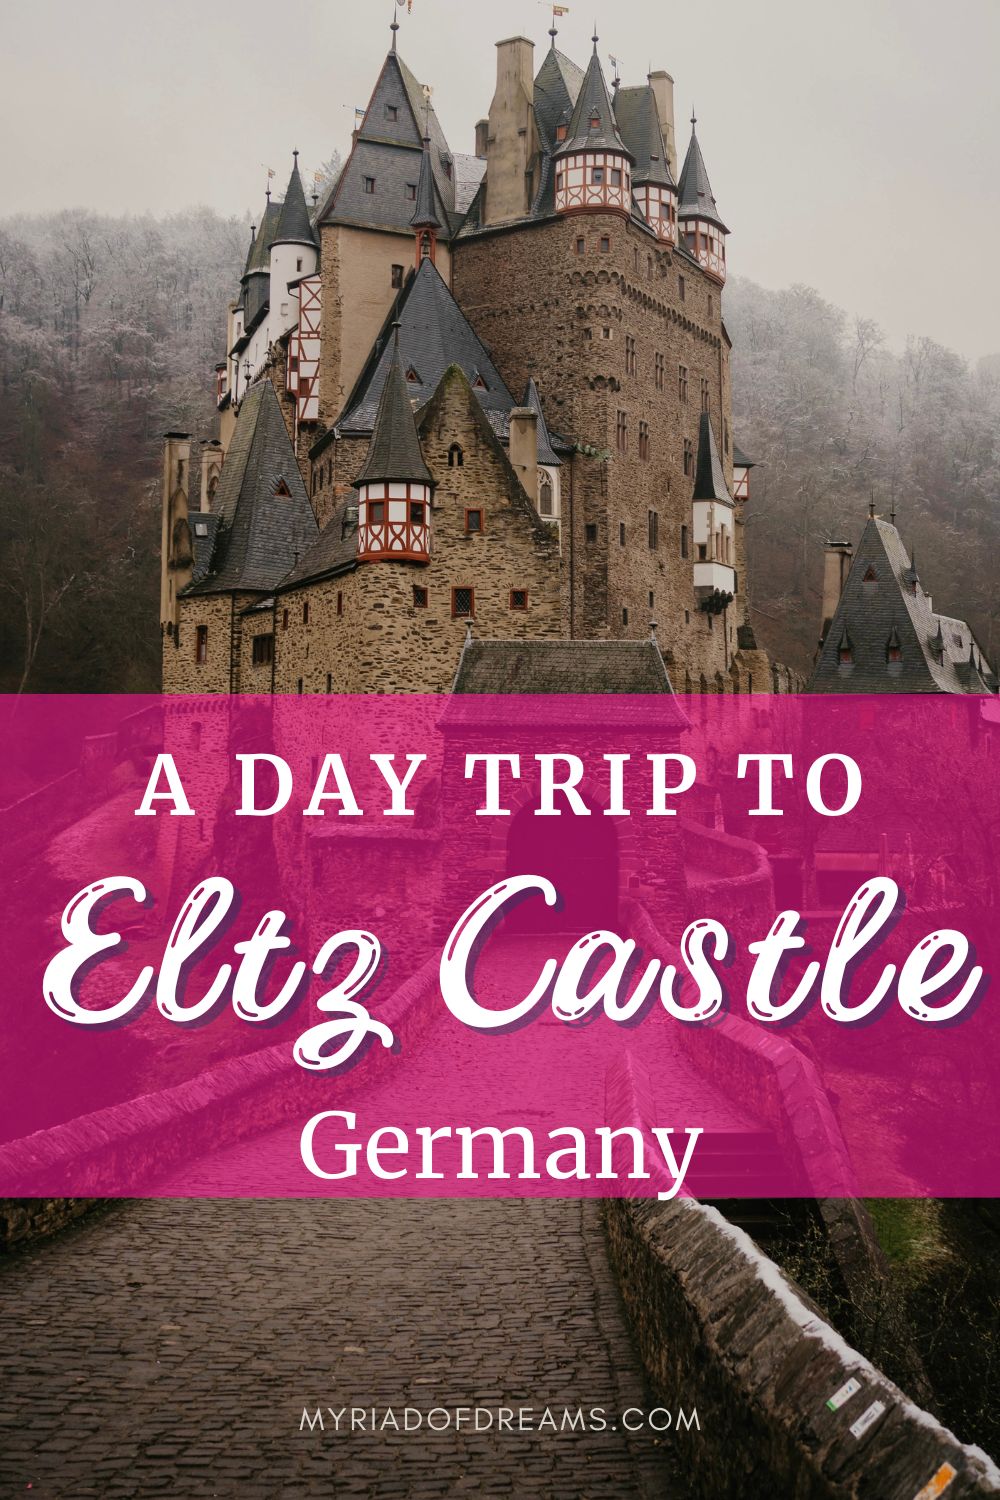 How to get to Eltz Castle. Ultimate guide to visiting Eltz Castle in Germany